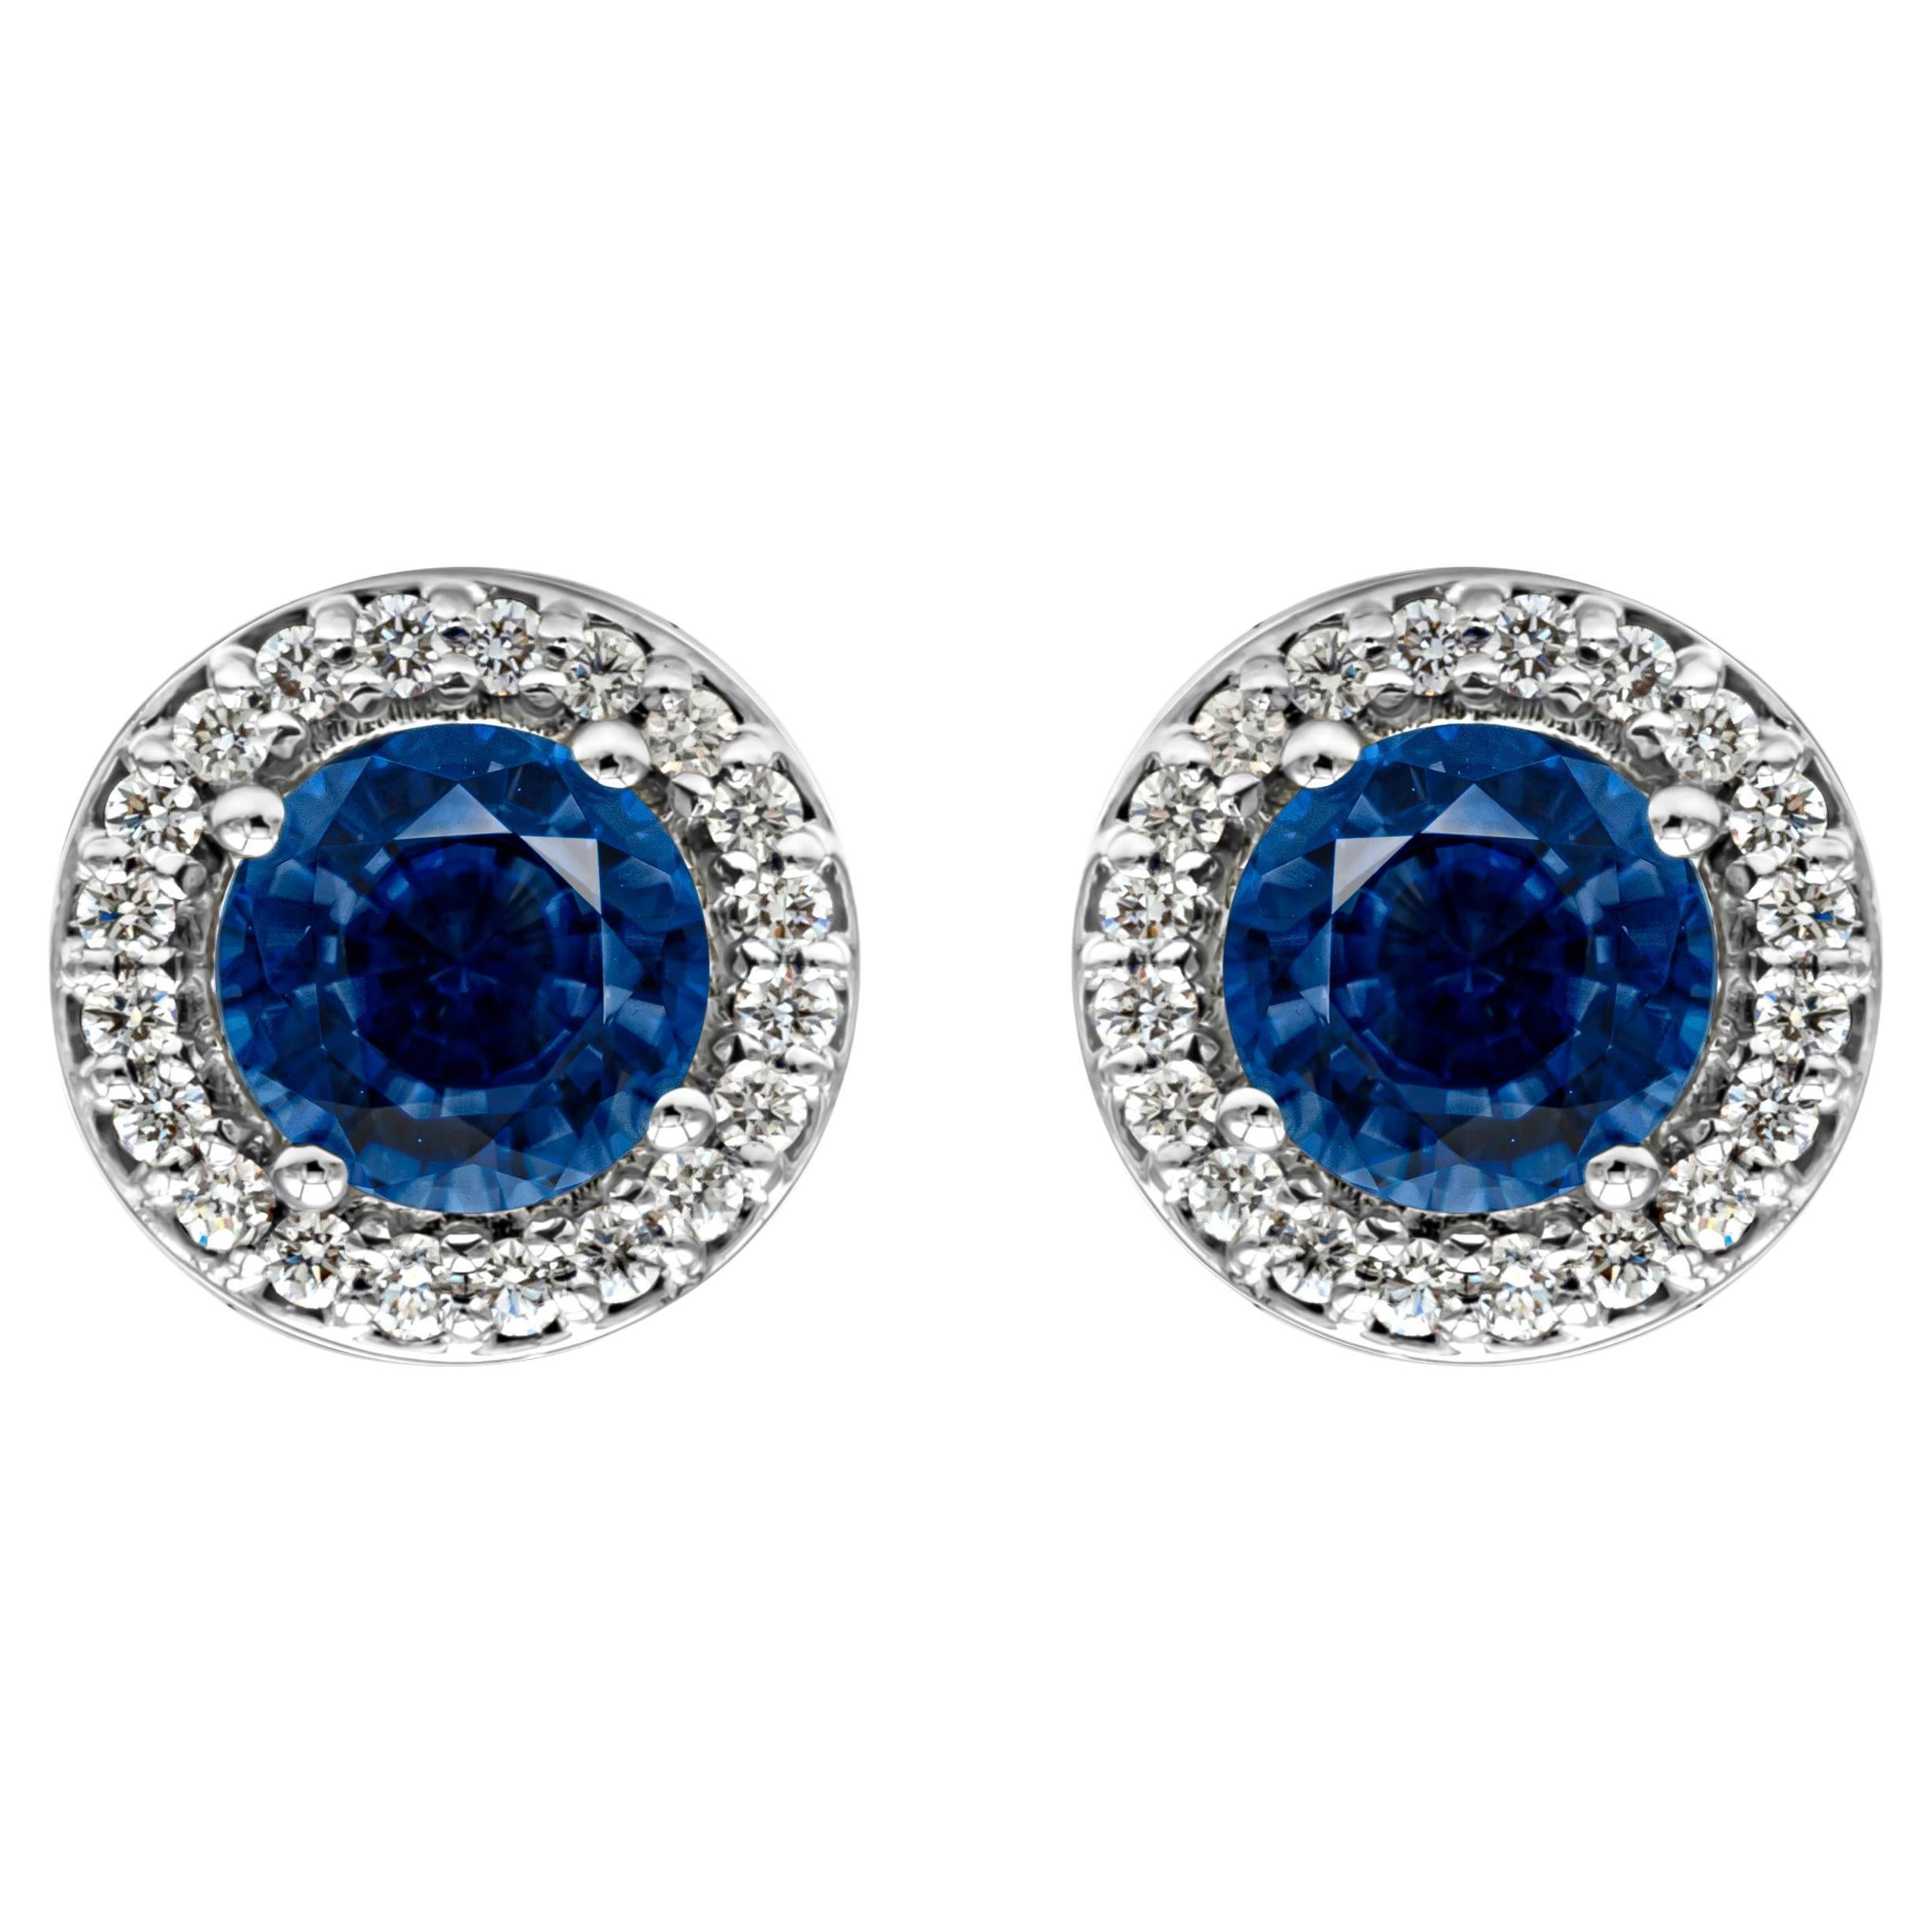 1.52 Carats Total Round Cut Royal Blue Sapphire and Diamond Halo Stud Earrings For Sale